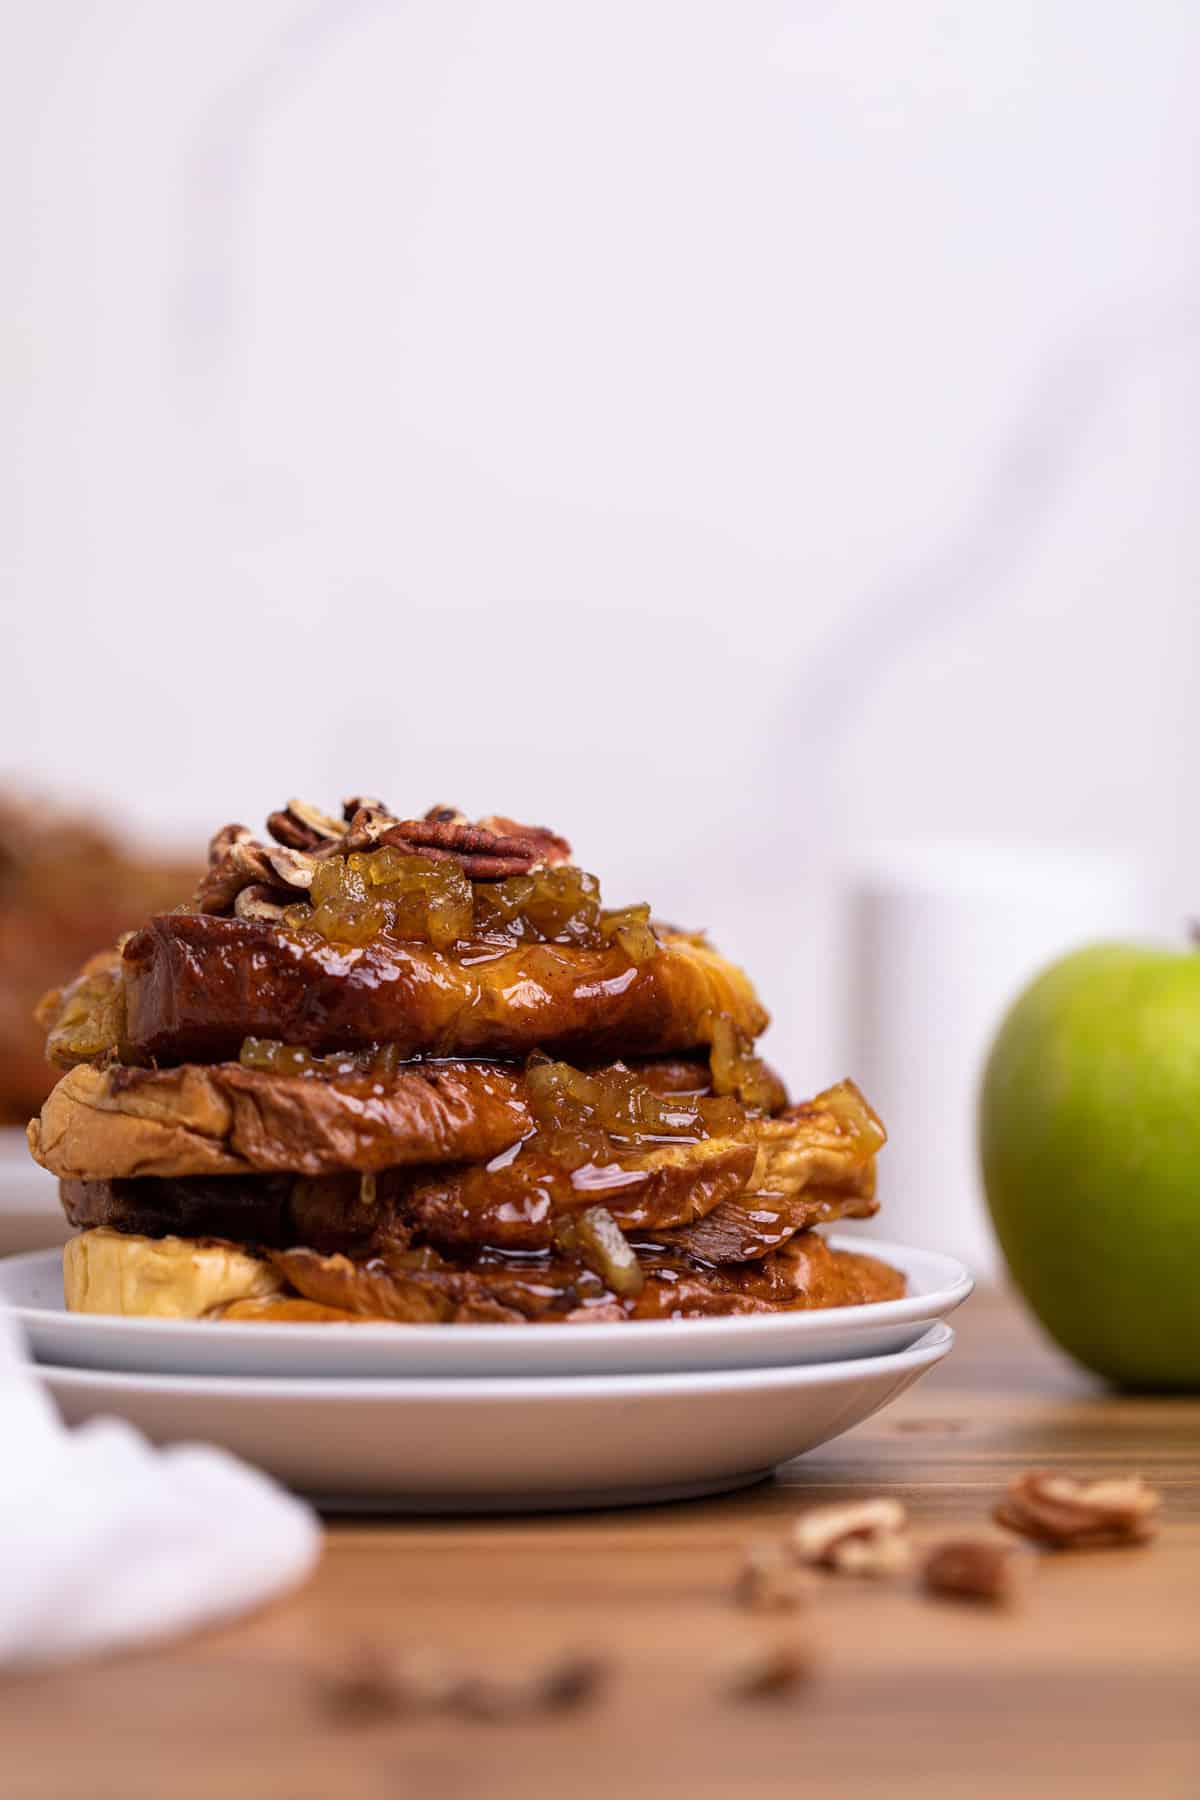 Caramelized Apple French Toast slices on two white plates with a green apple on the side.